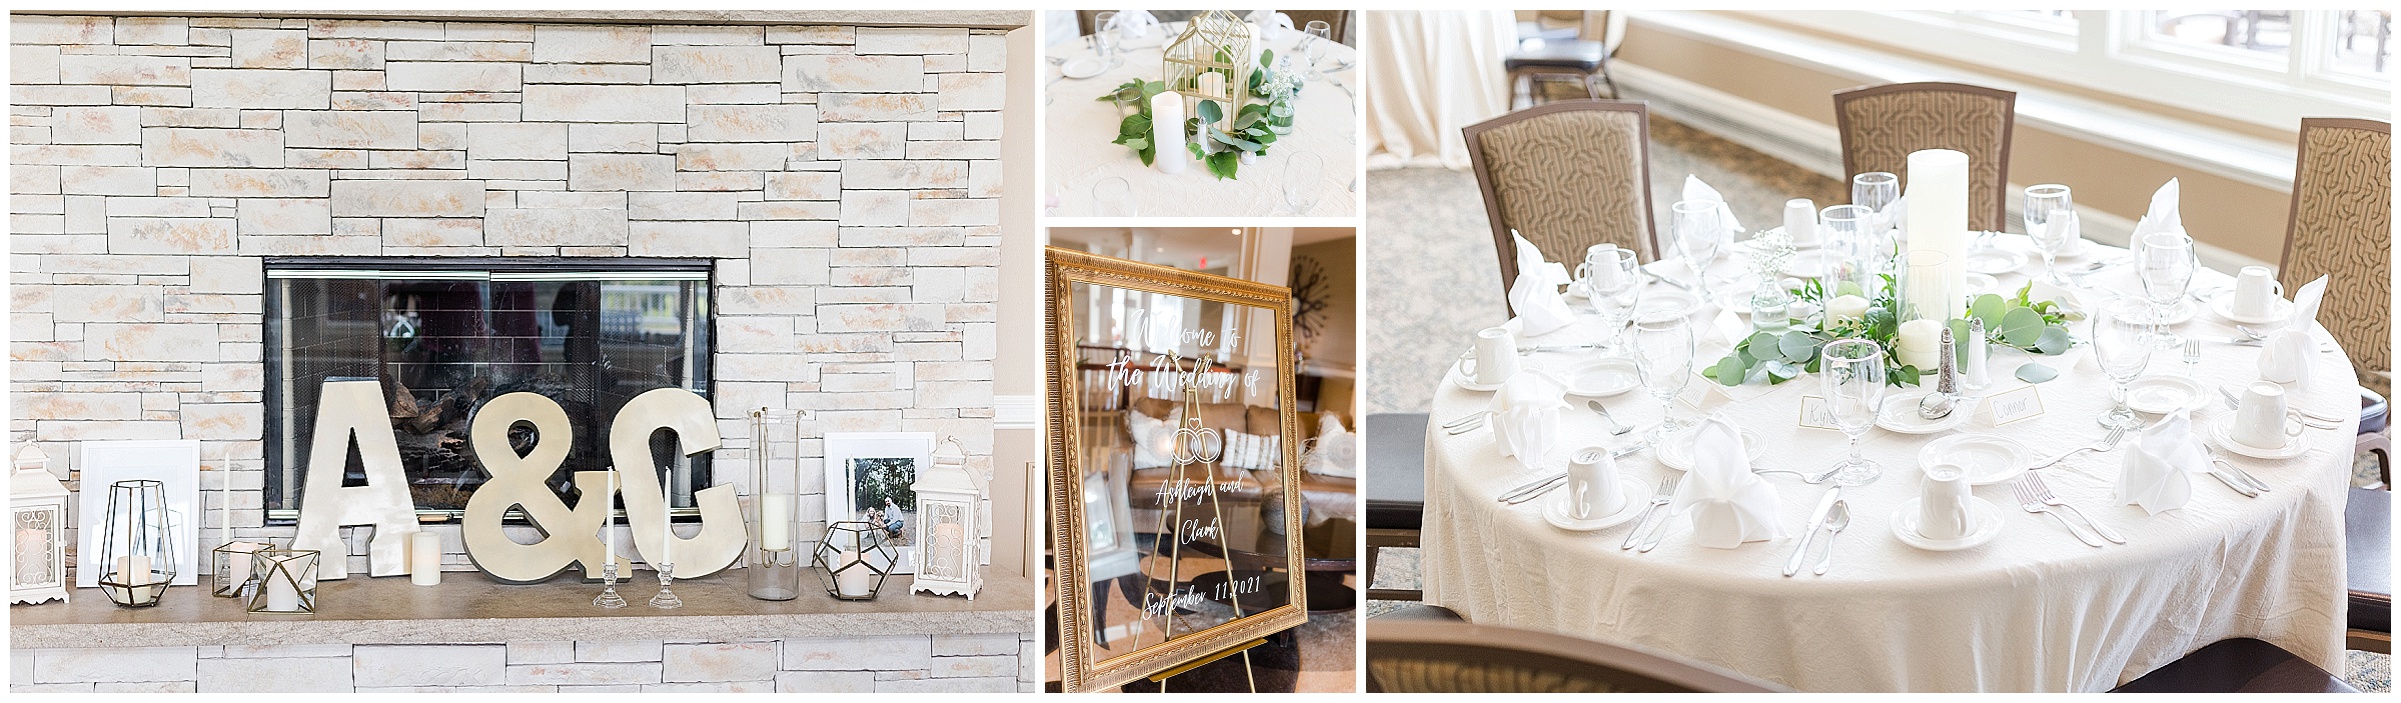 Wedding day reception details, including the fireplace, mirror sign, centerpiece, and guest table